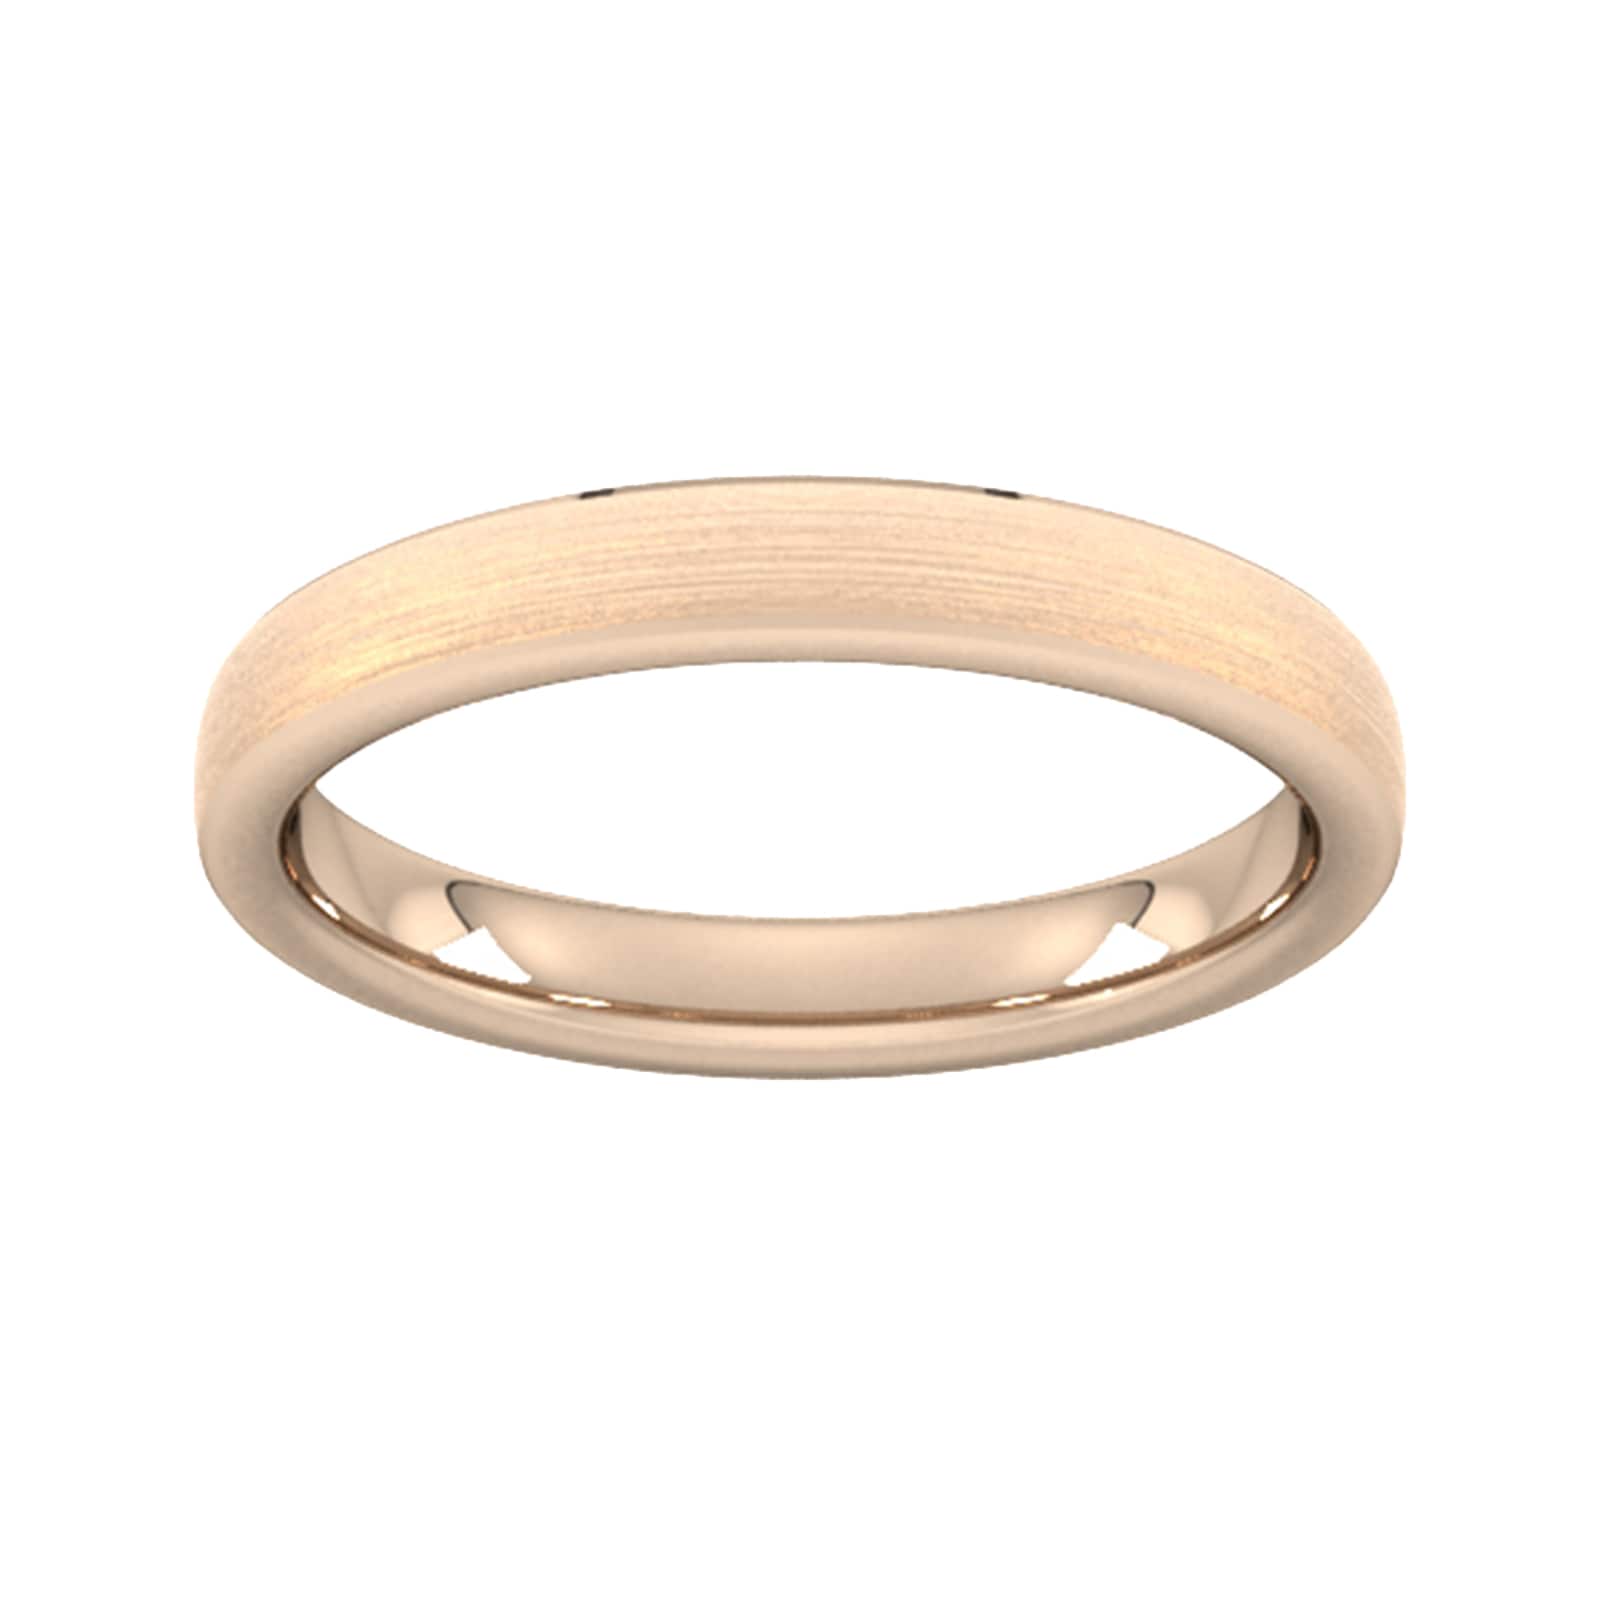 3mm Slight Court Standard Polished Chamfered Edges With Matt Centre Wedding Ring In 9 Carat Rose Gold - Ring Size J